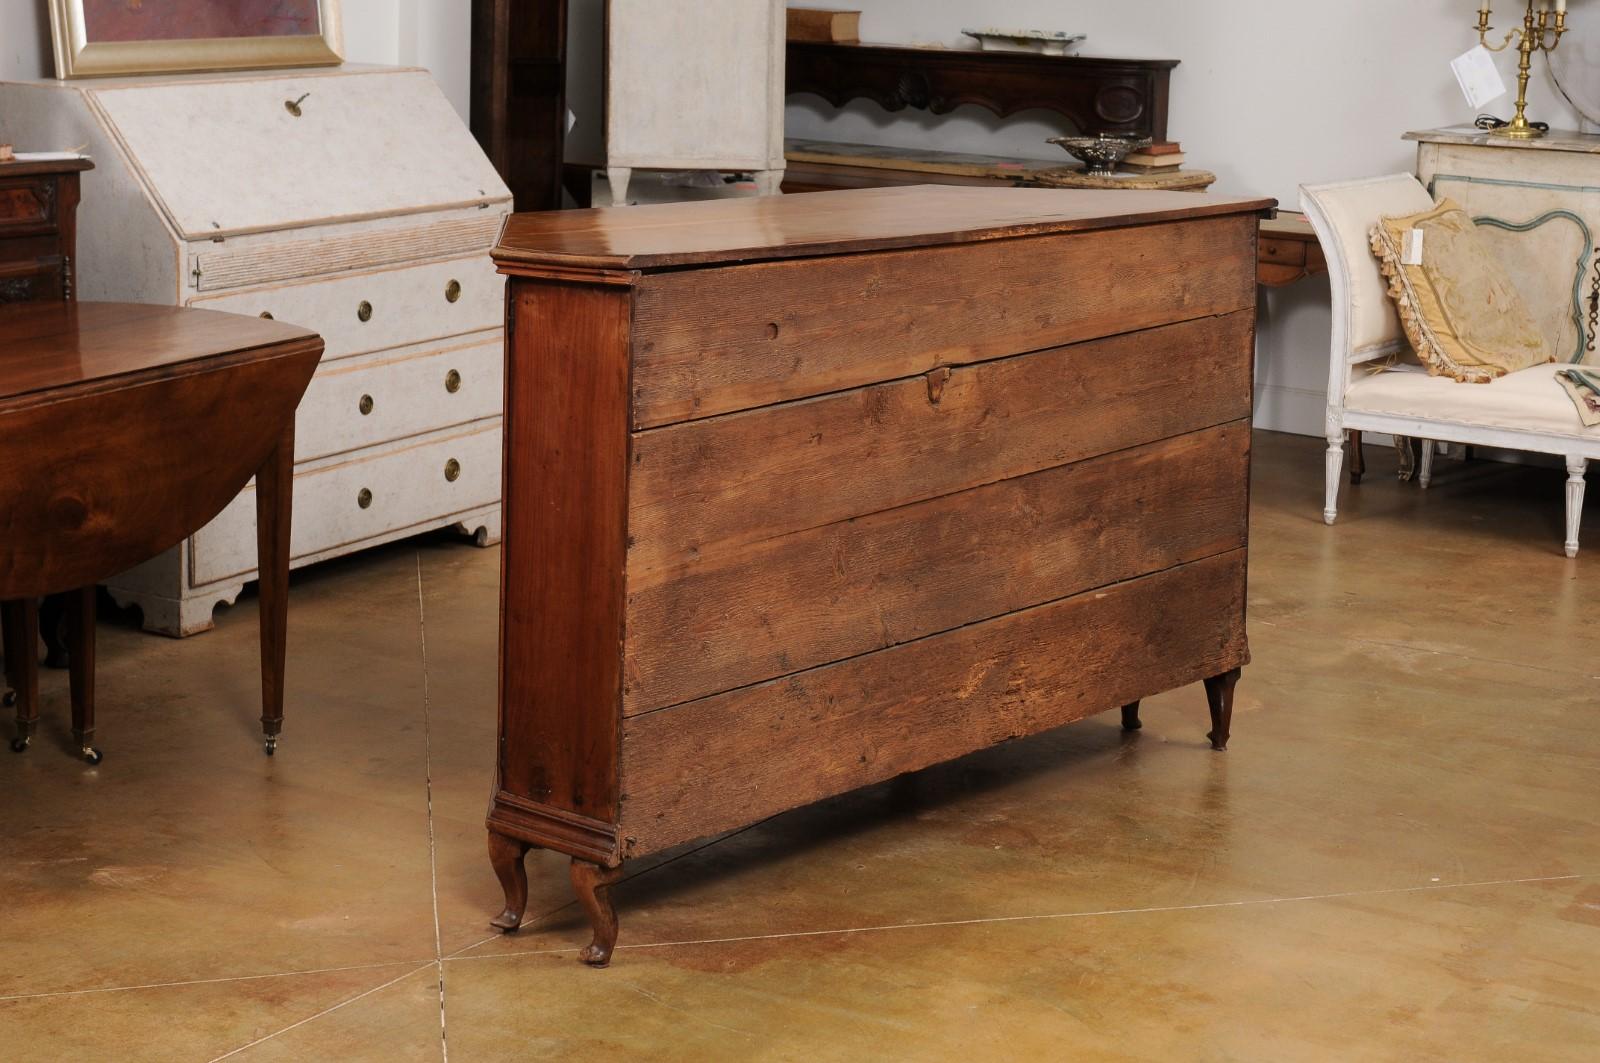 An Italian cherry sideboard from the late 18th century with four carved doors, canted corners and scrolling feet. Created in Italy during the later years of the 18th century, this cherry sideboard features a polygonal planked top sitting above a